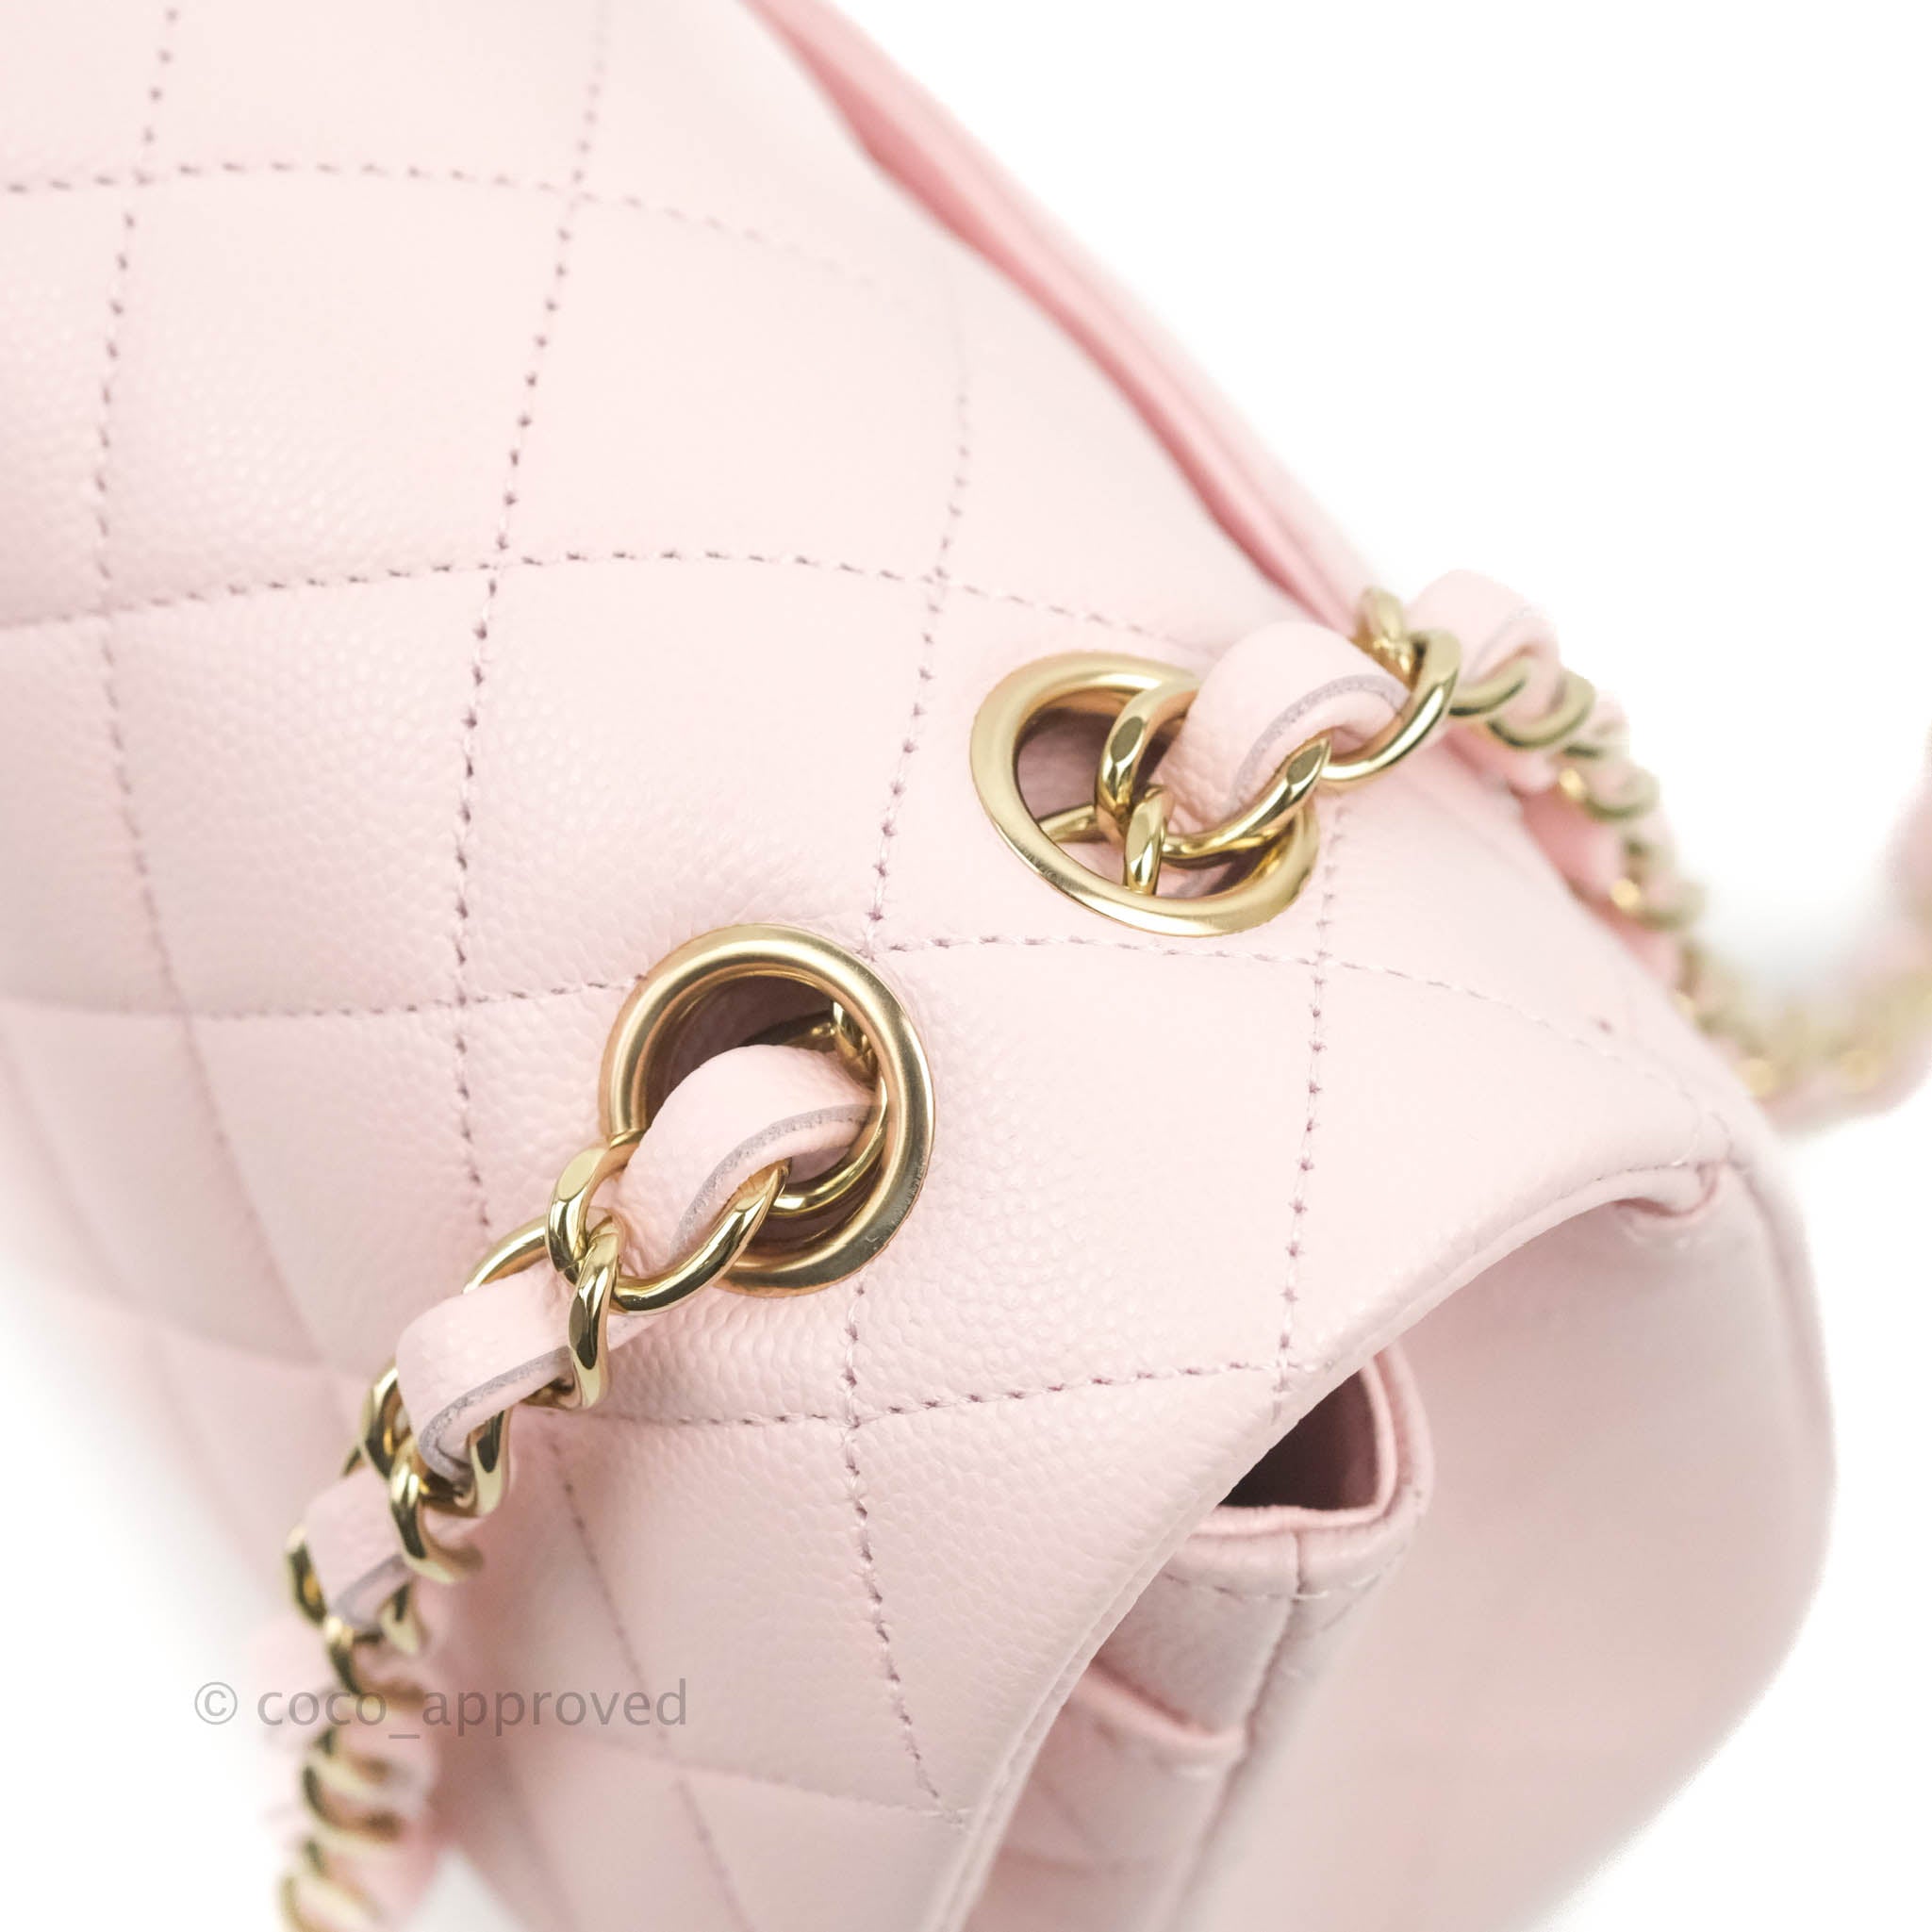 chanel classic bag pink